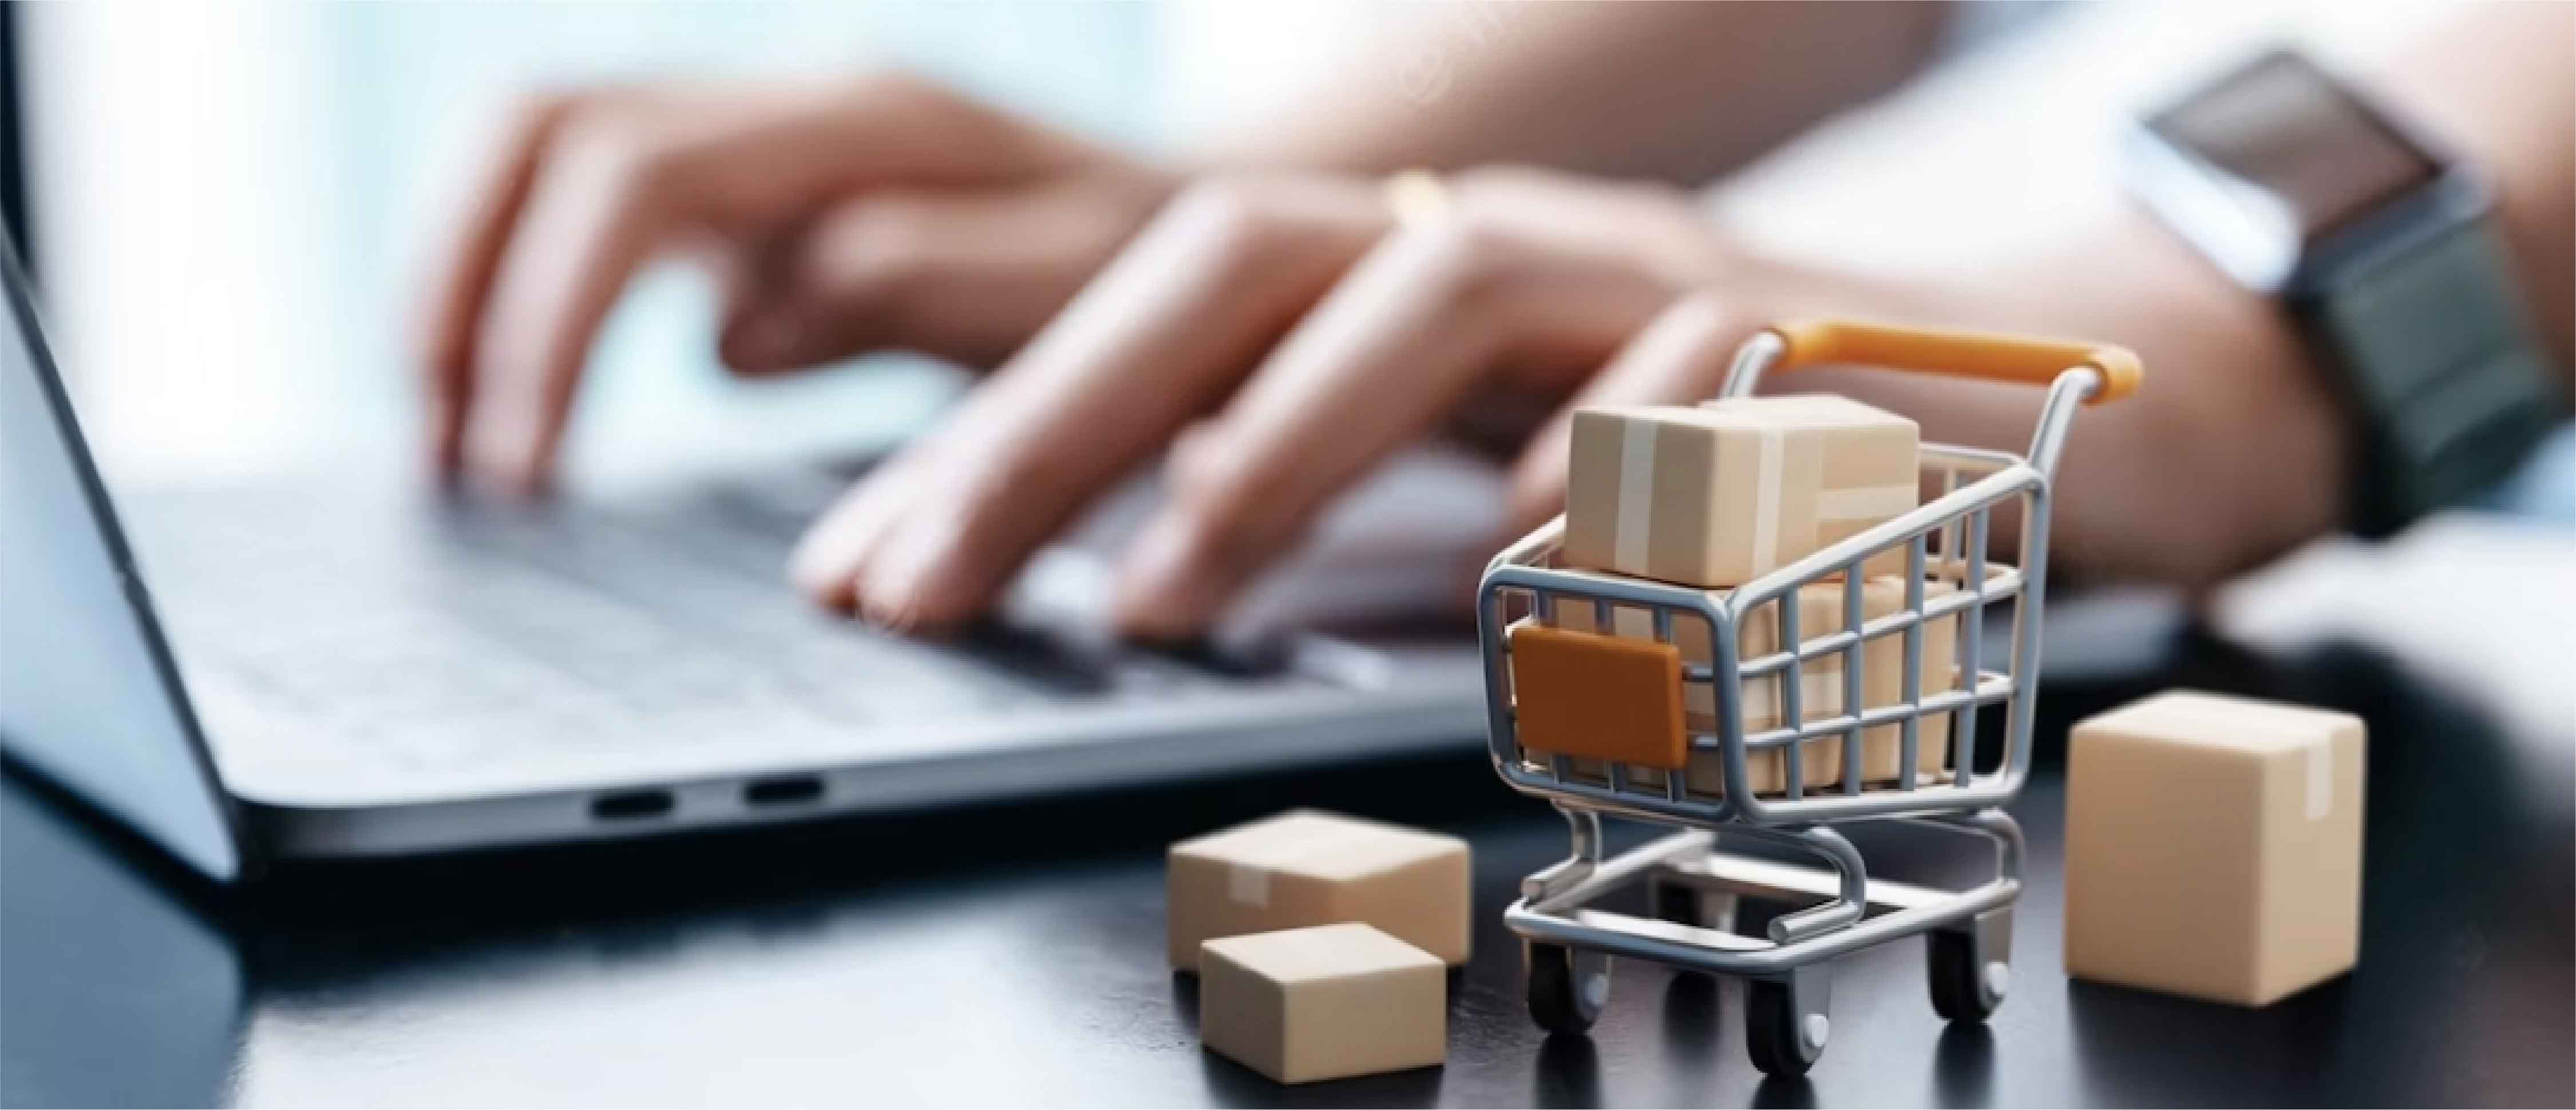 Your guide to e-commerce through Amazon